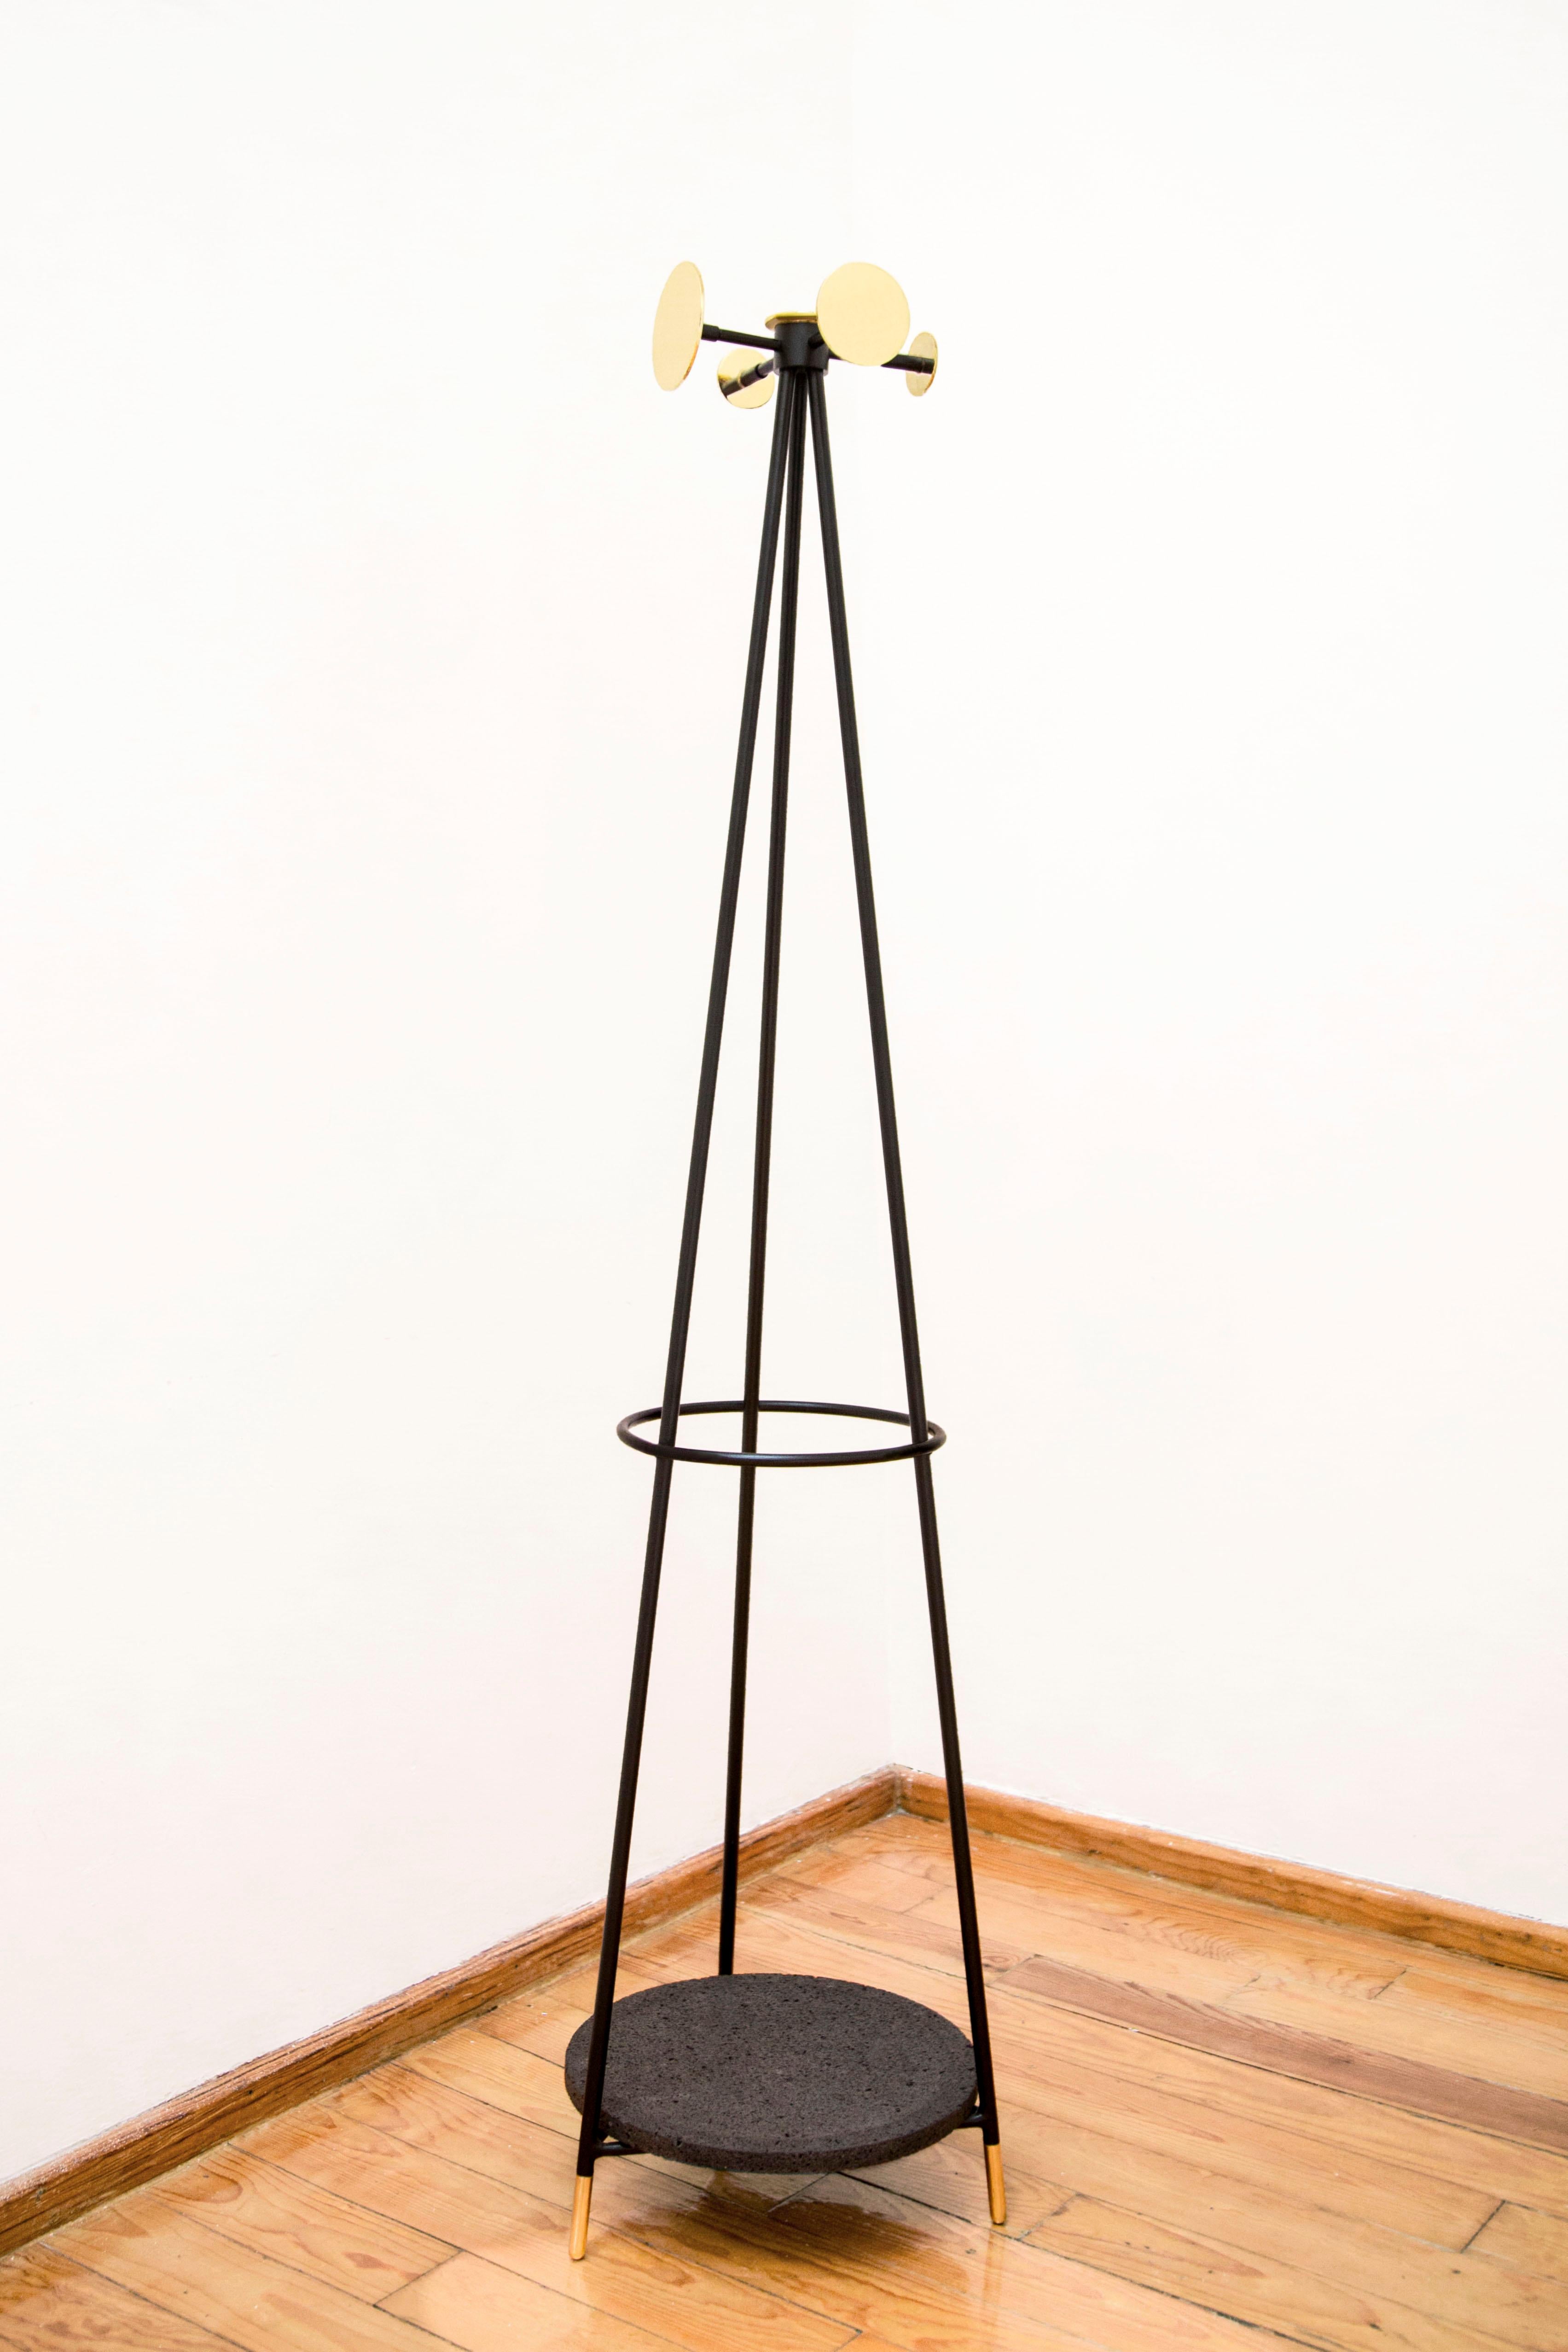 Mexican Brass Coat and Umbrella Stand by Comité De Proyectos For Sale